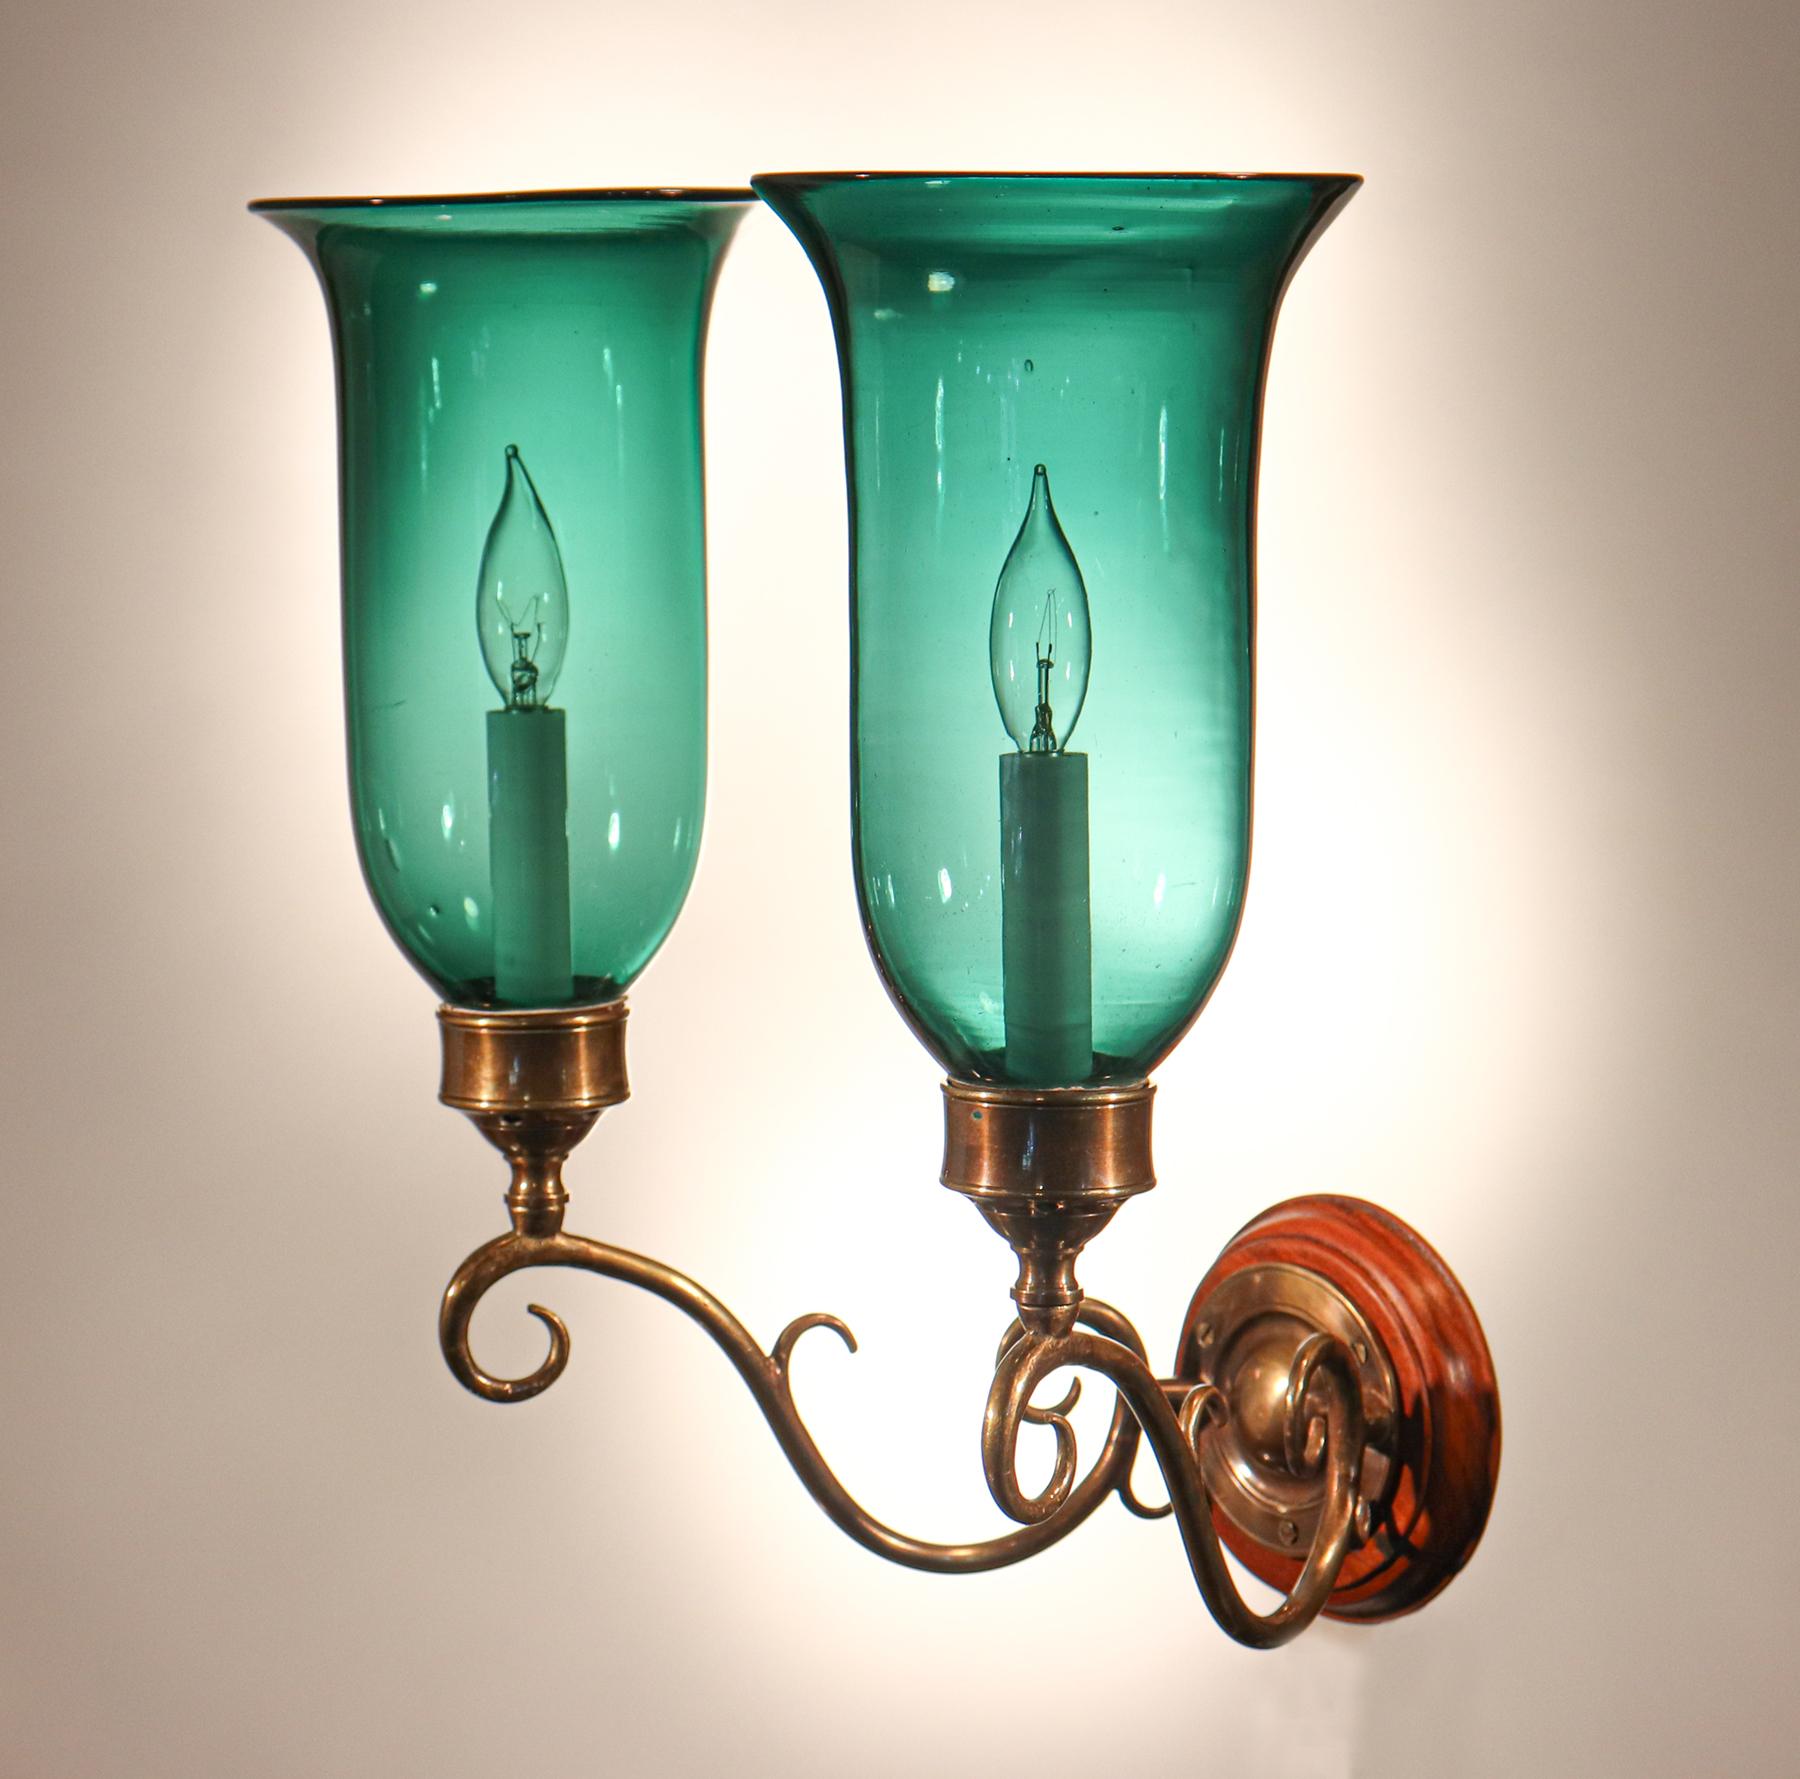 antique double arm wall lighting